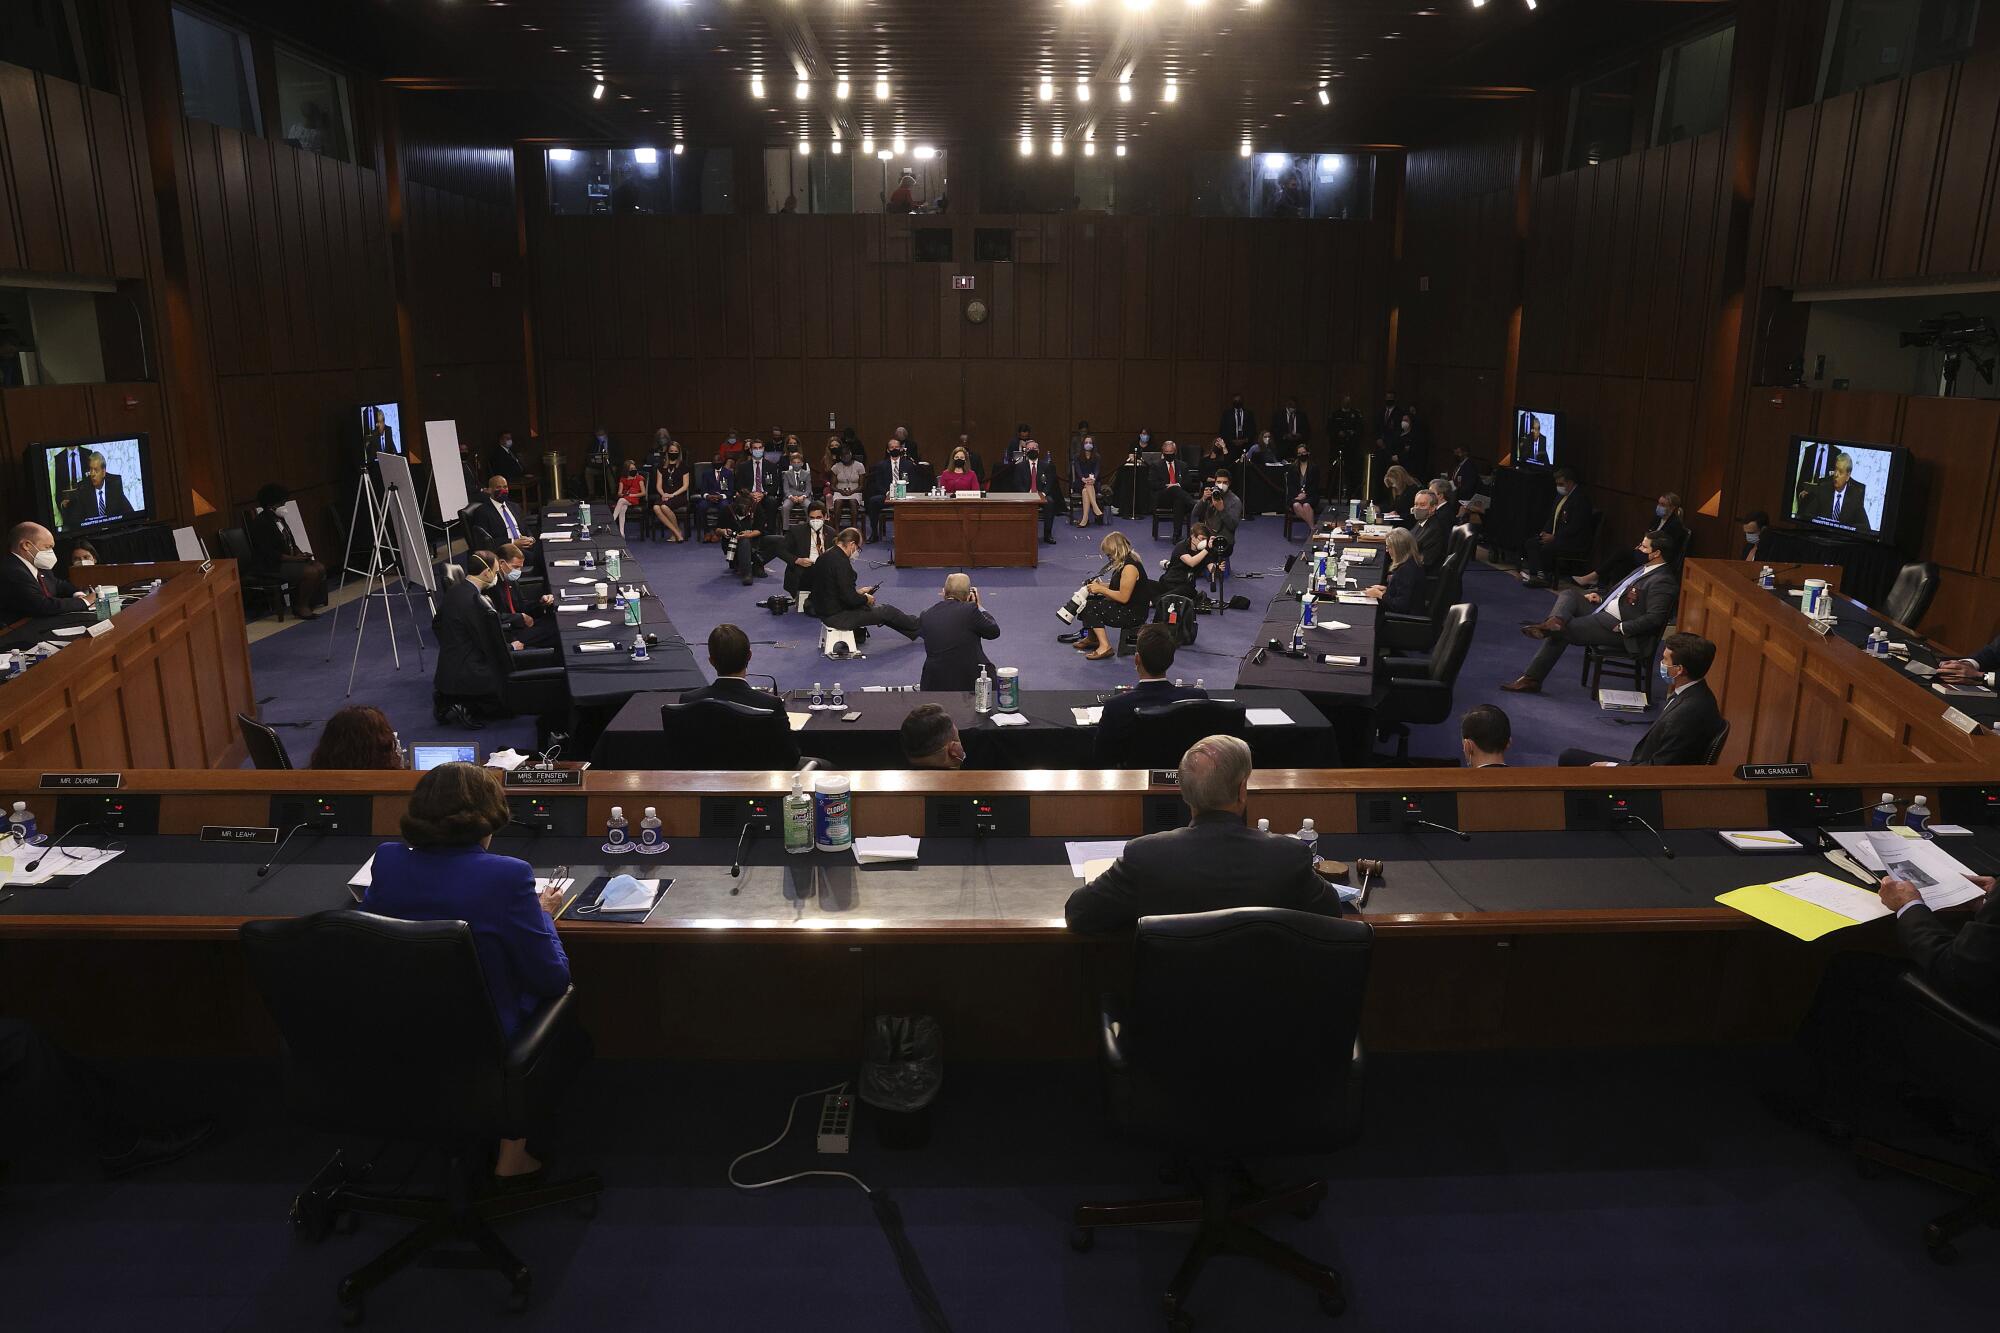 An overview of the hearing room shows senators, spaced a few feet apart, and Amy Coney Barrett seated at a desk.